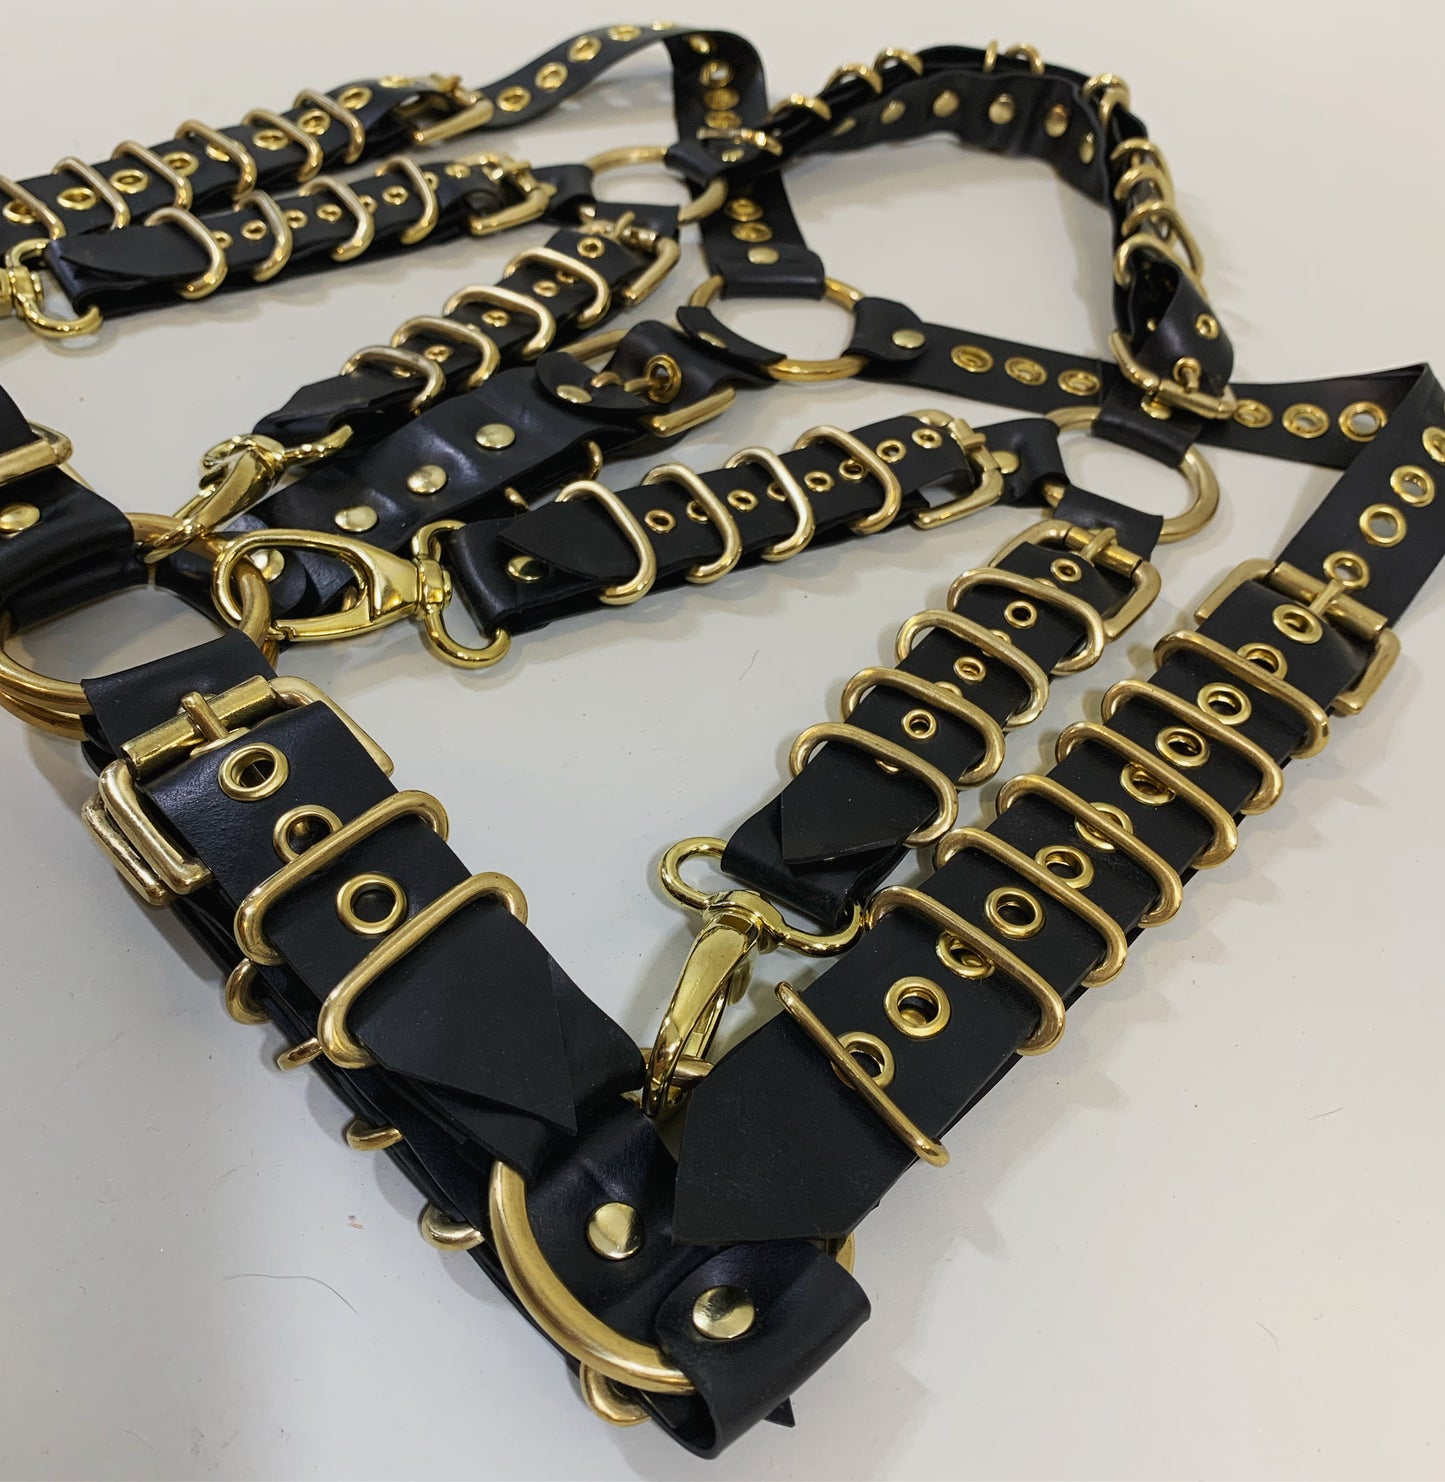 READY TO SHIP - Alter harness